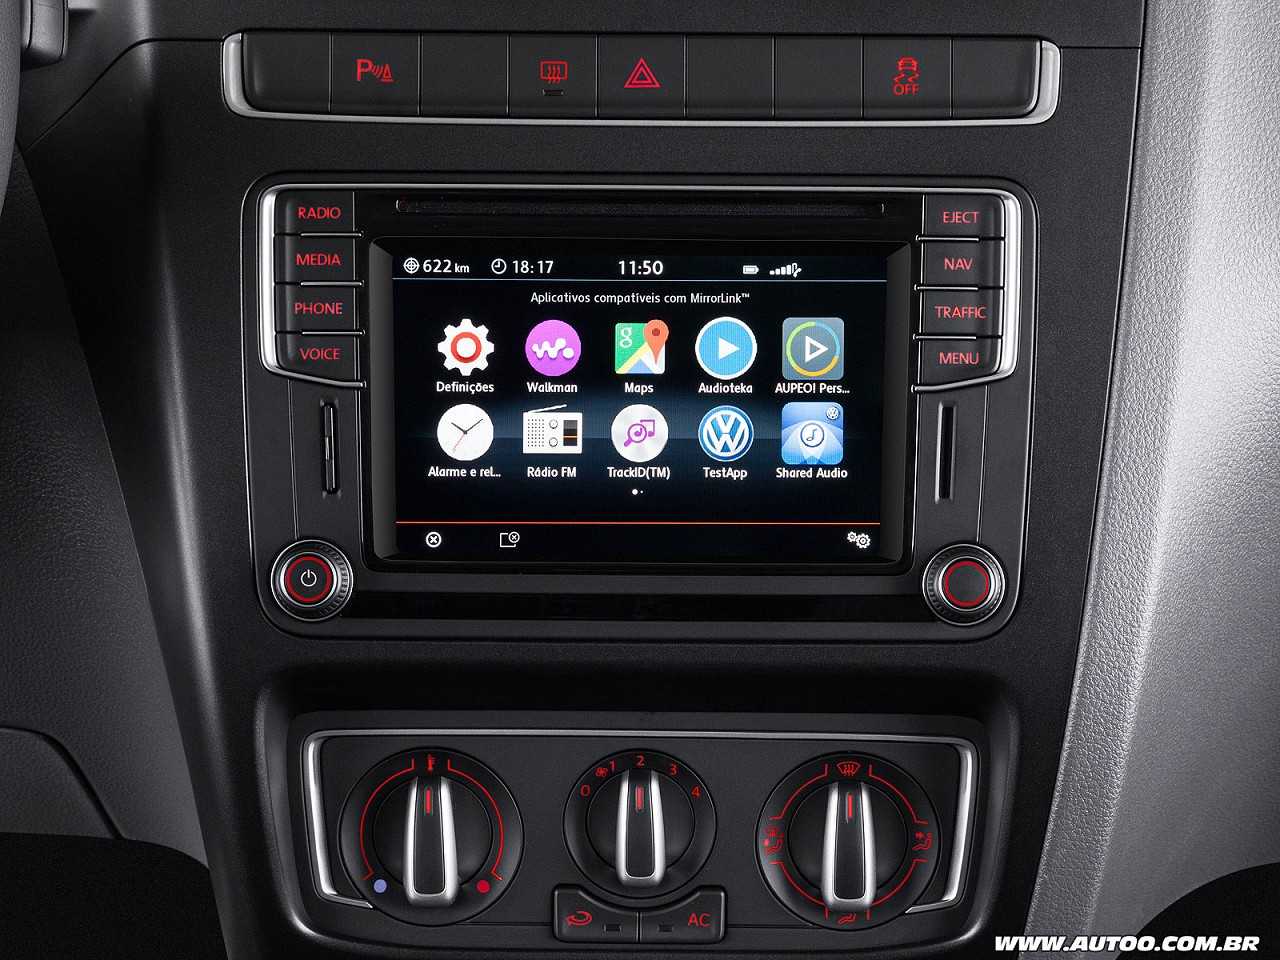 VolkswagenFox 2017 - console central